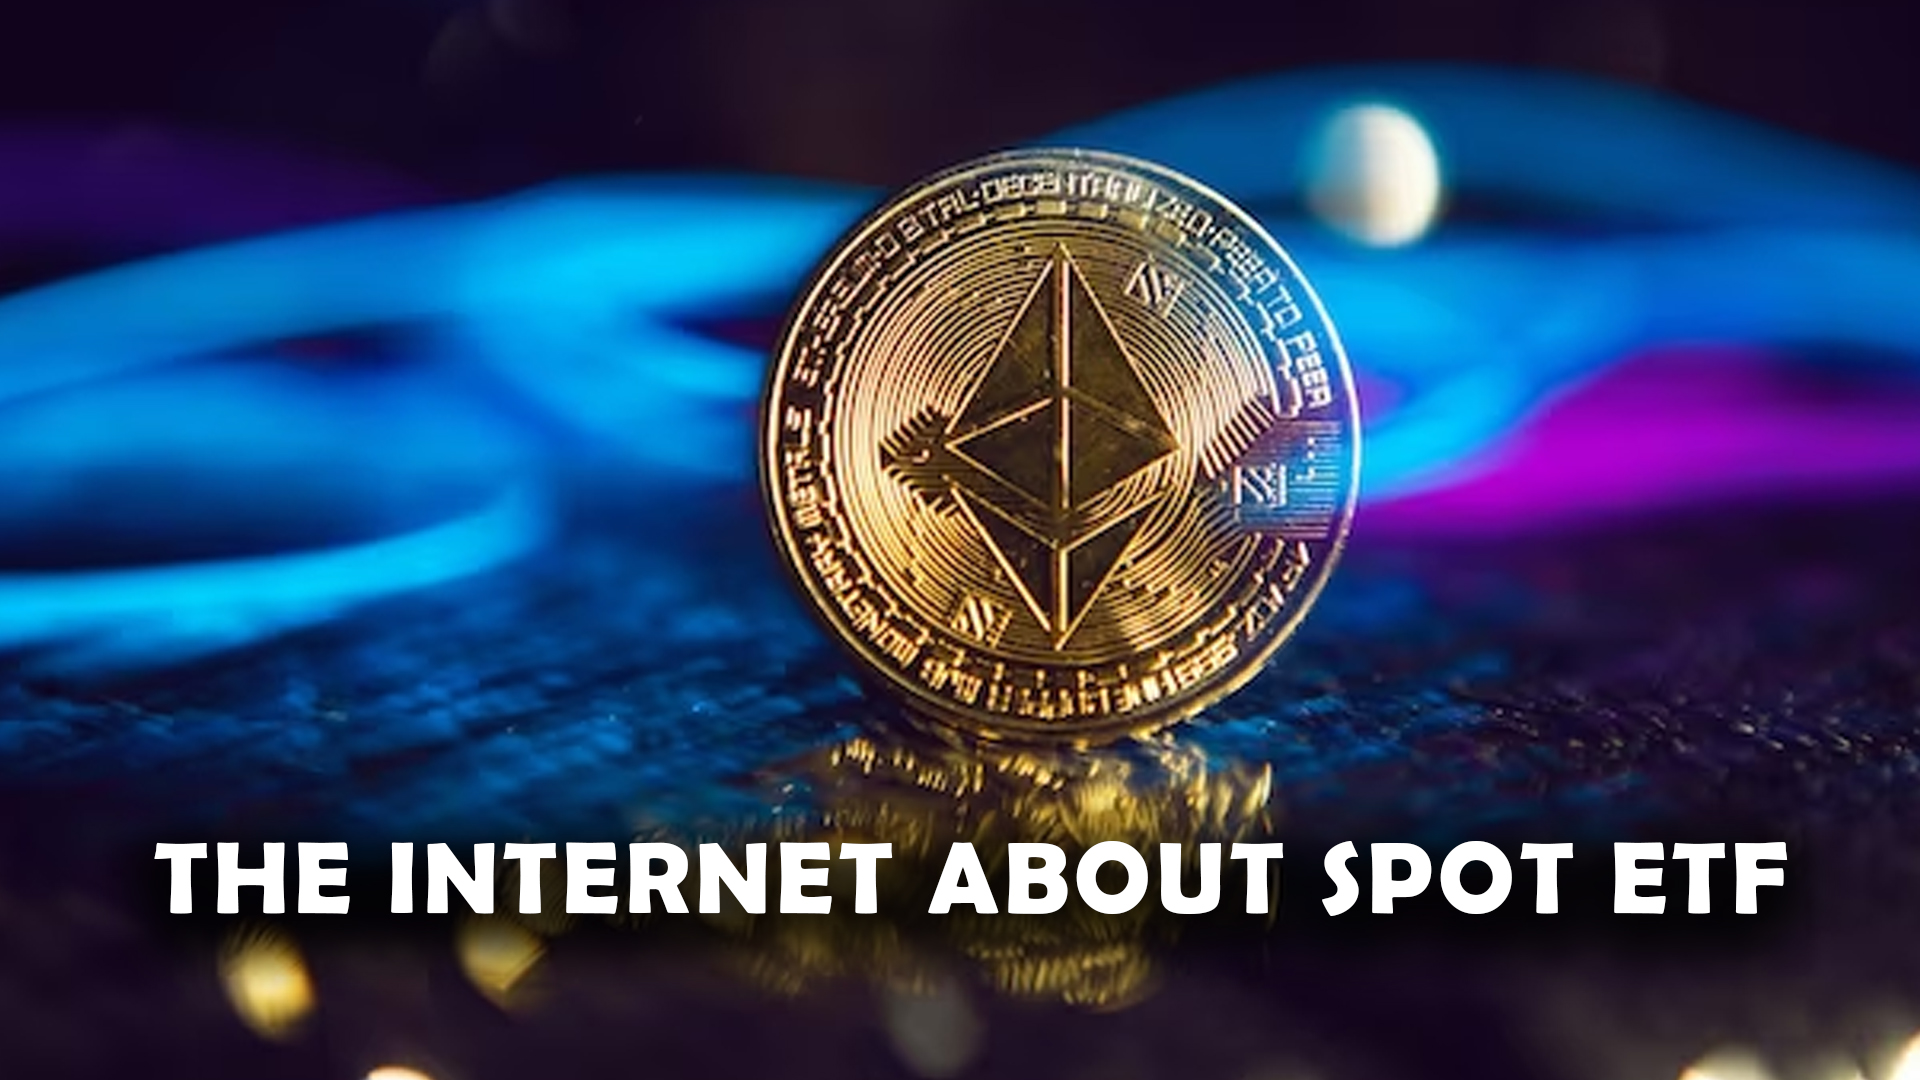 Everything There Is on the Internet About Spot ETF Ethereum Explained